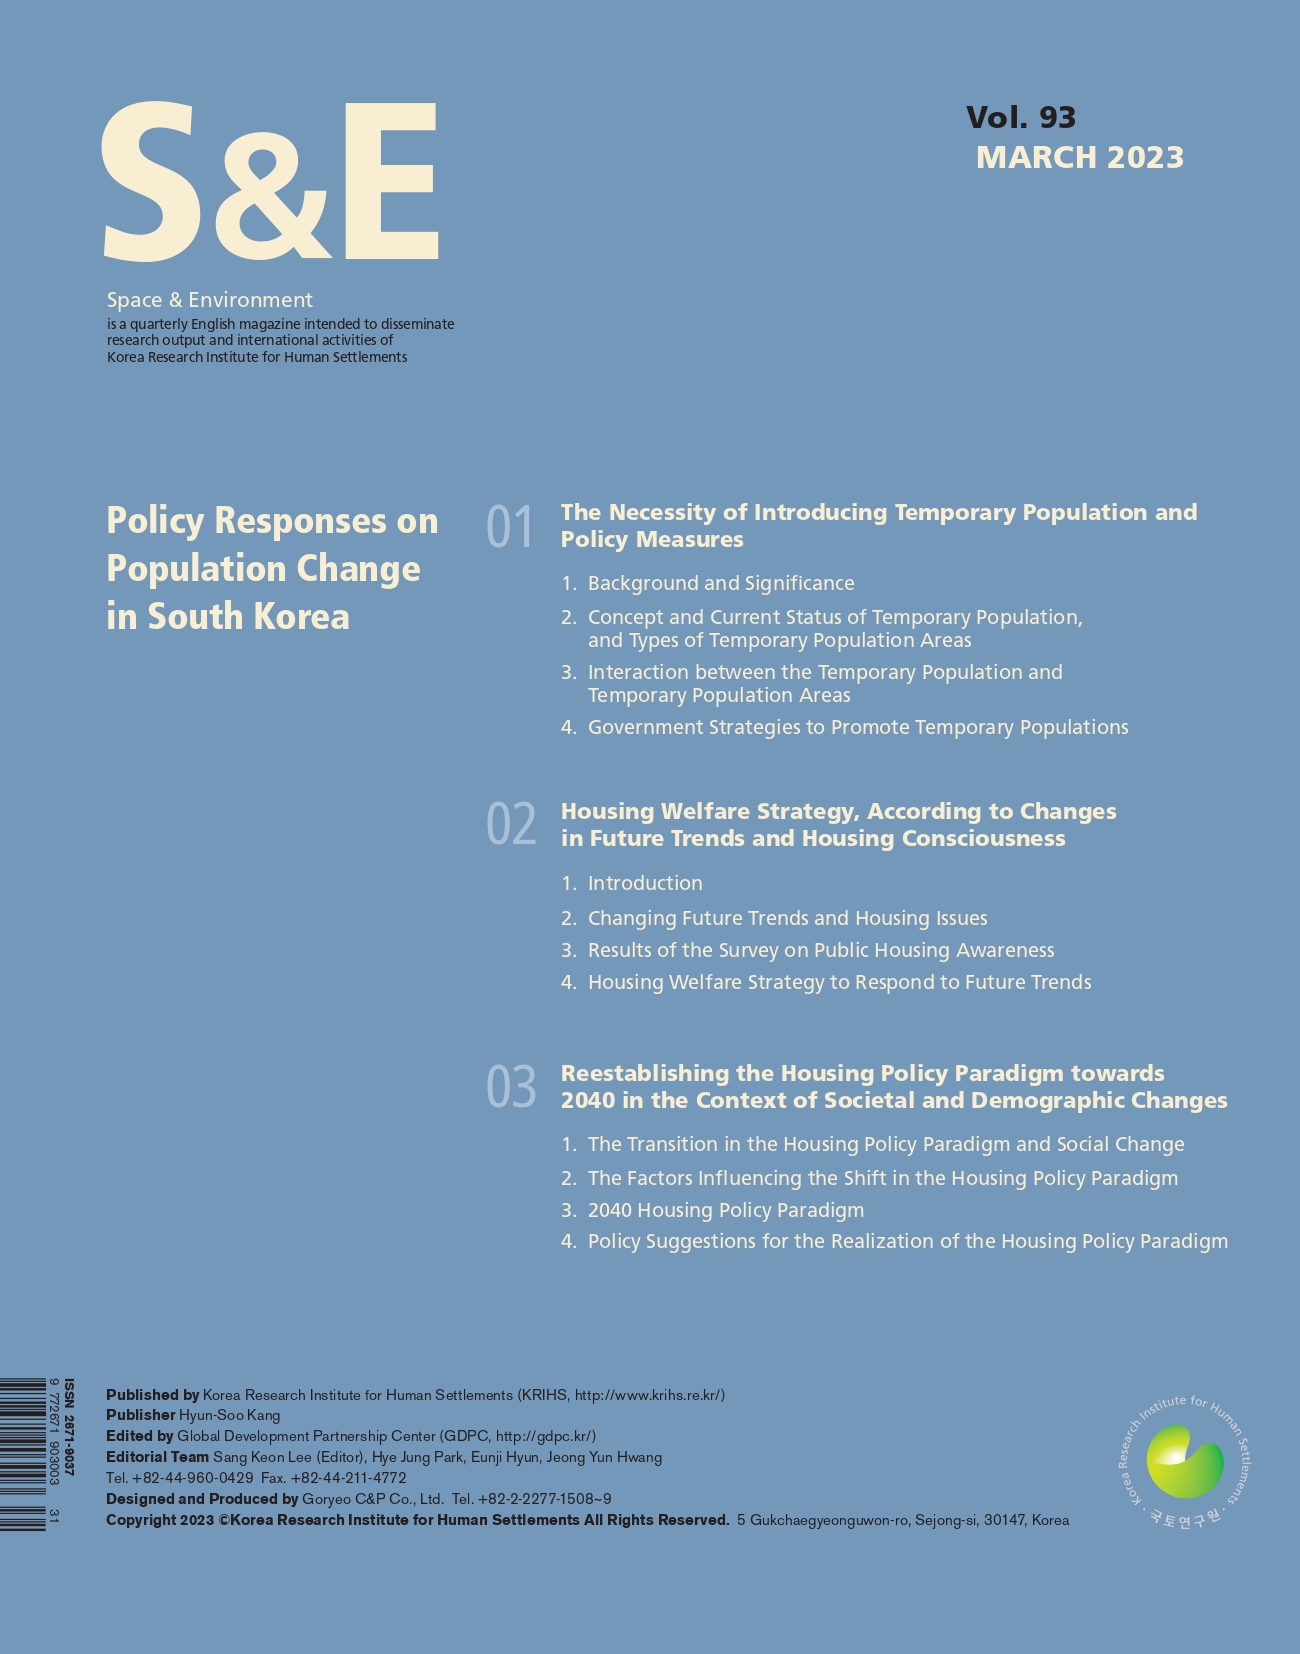 Space & Environment Vol. 93 (March 2023)
Policy Responses on Population Change in South Korea